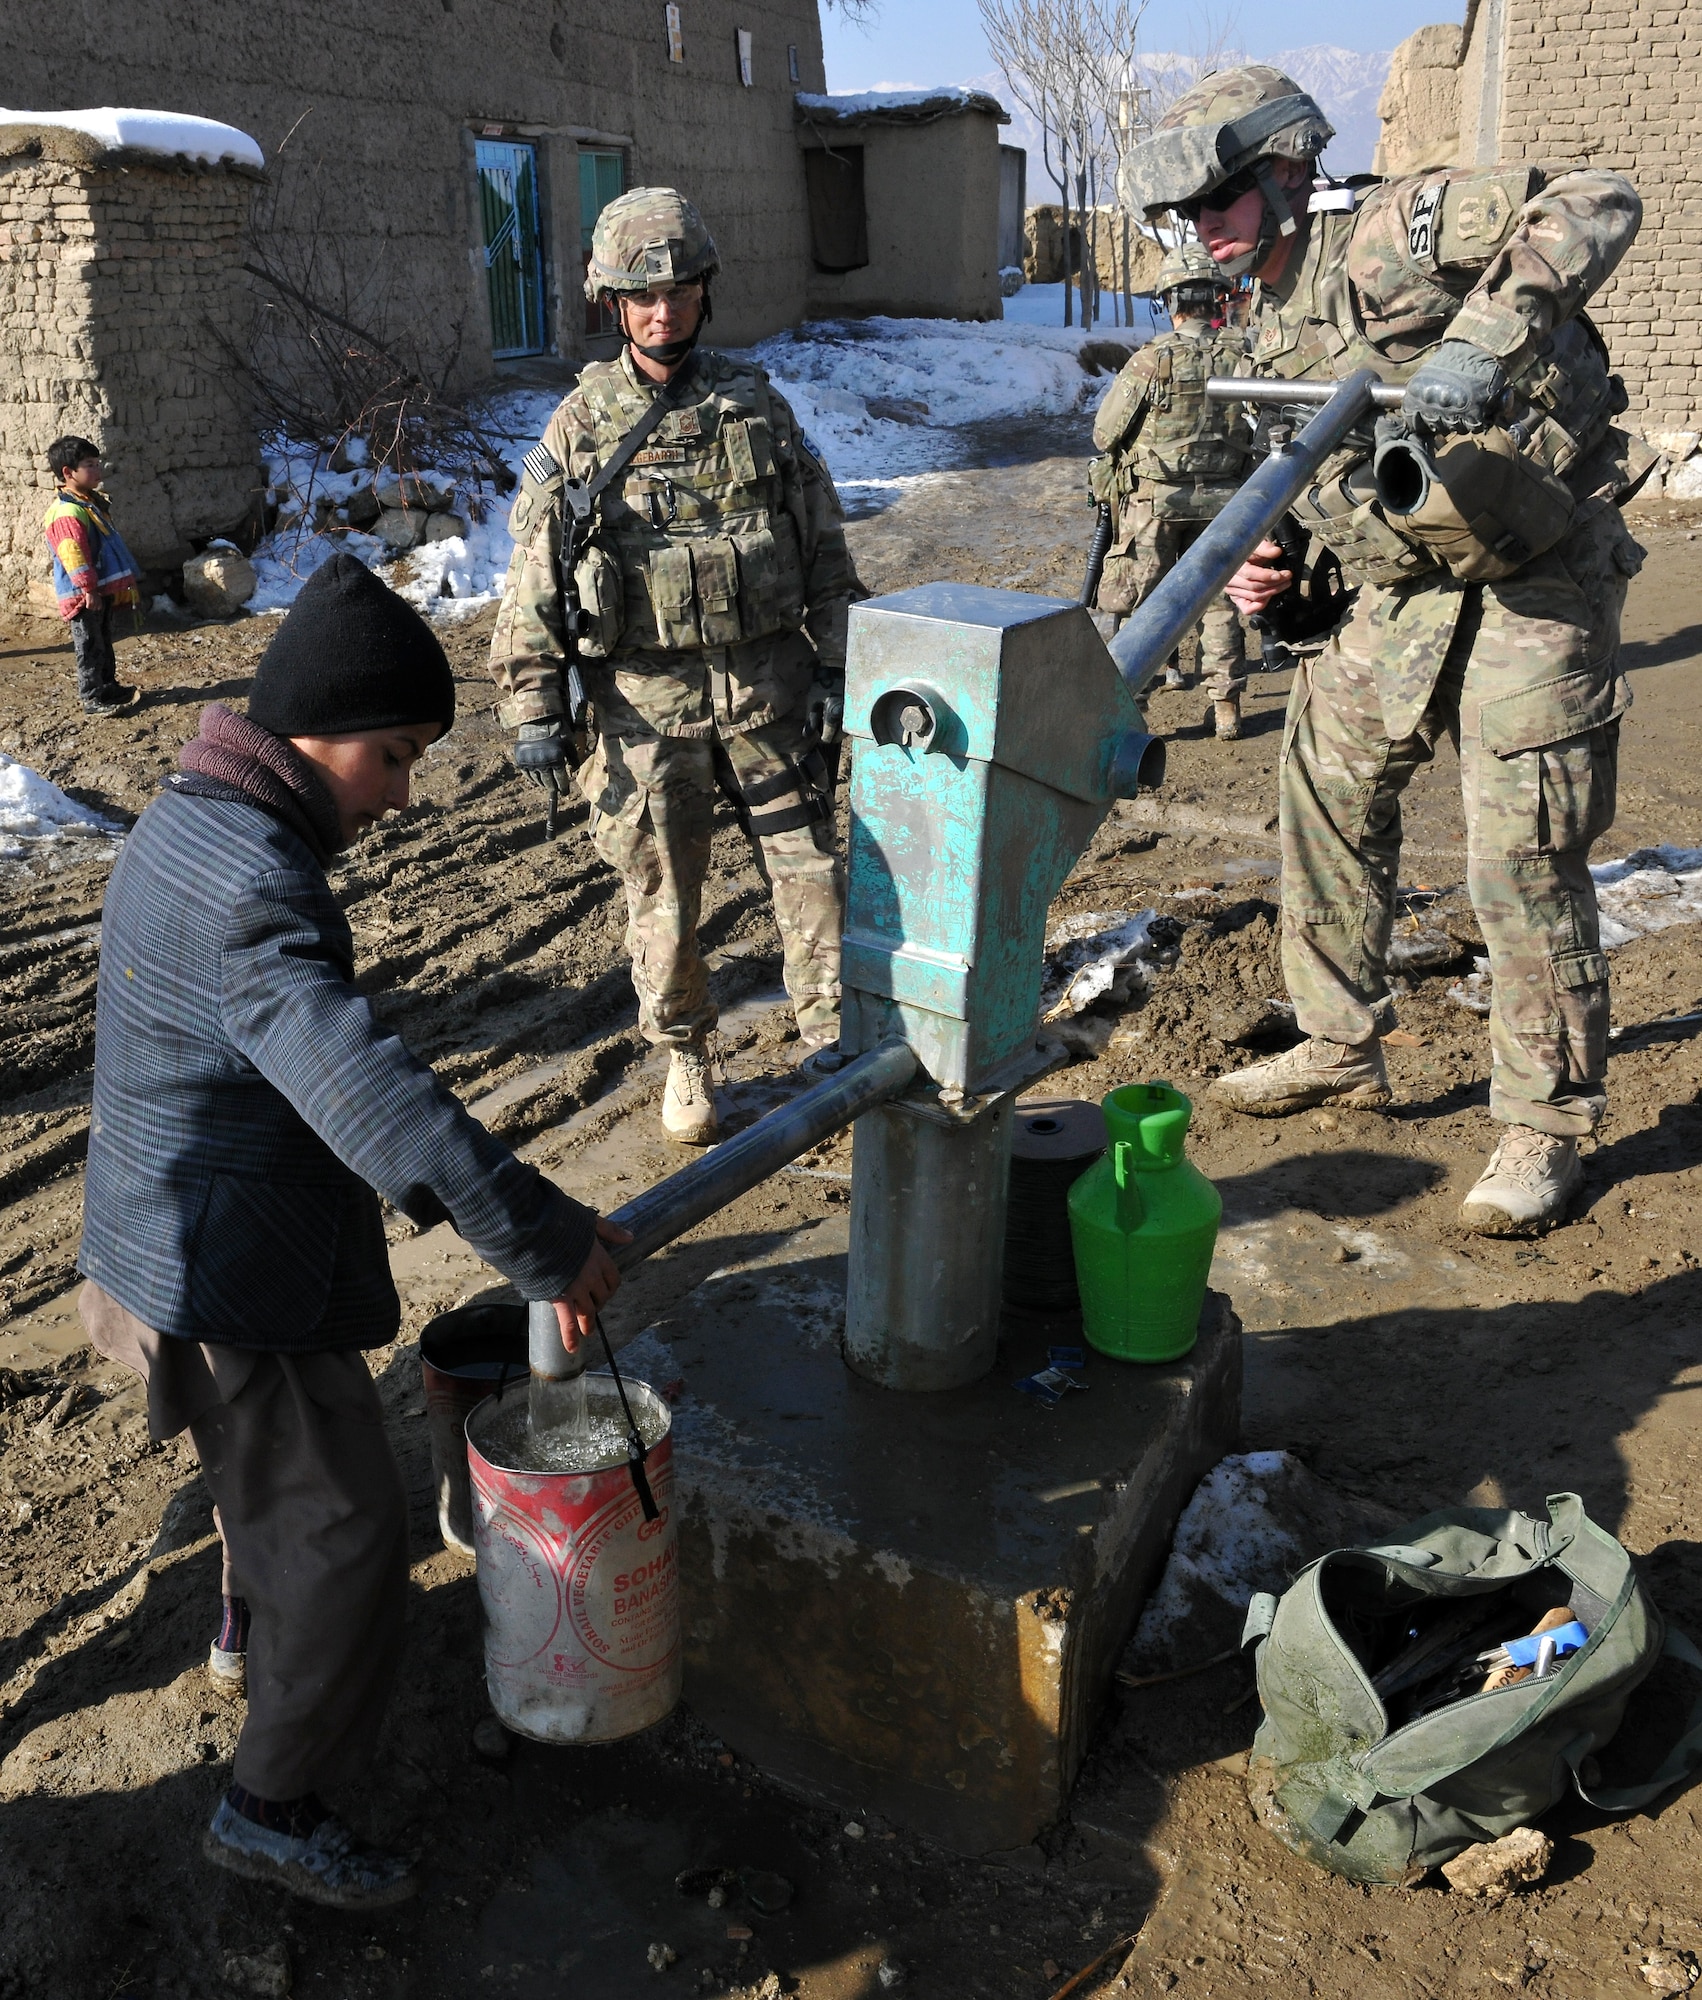 U.S. Airmen and local Afghan children pump water from the recently fixed water well located in a village near Bagram Airfield, Afghanistan, Jan. 26, 2013. The Airmen teamed up with local Afghan leaders to fix the broken well and bring the fresh groundwater back to the village. (U.S. Air Force photo/Senior Airman Chris Willis)
